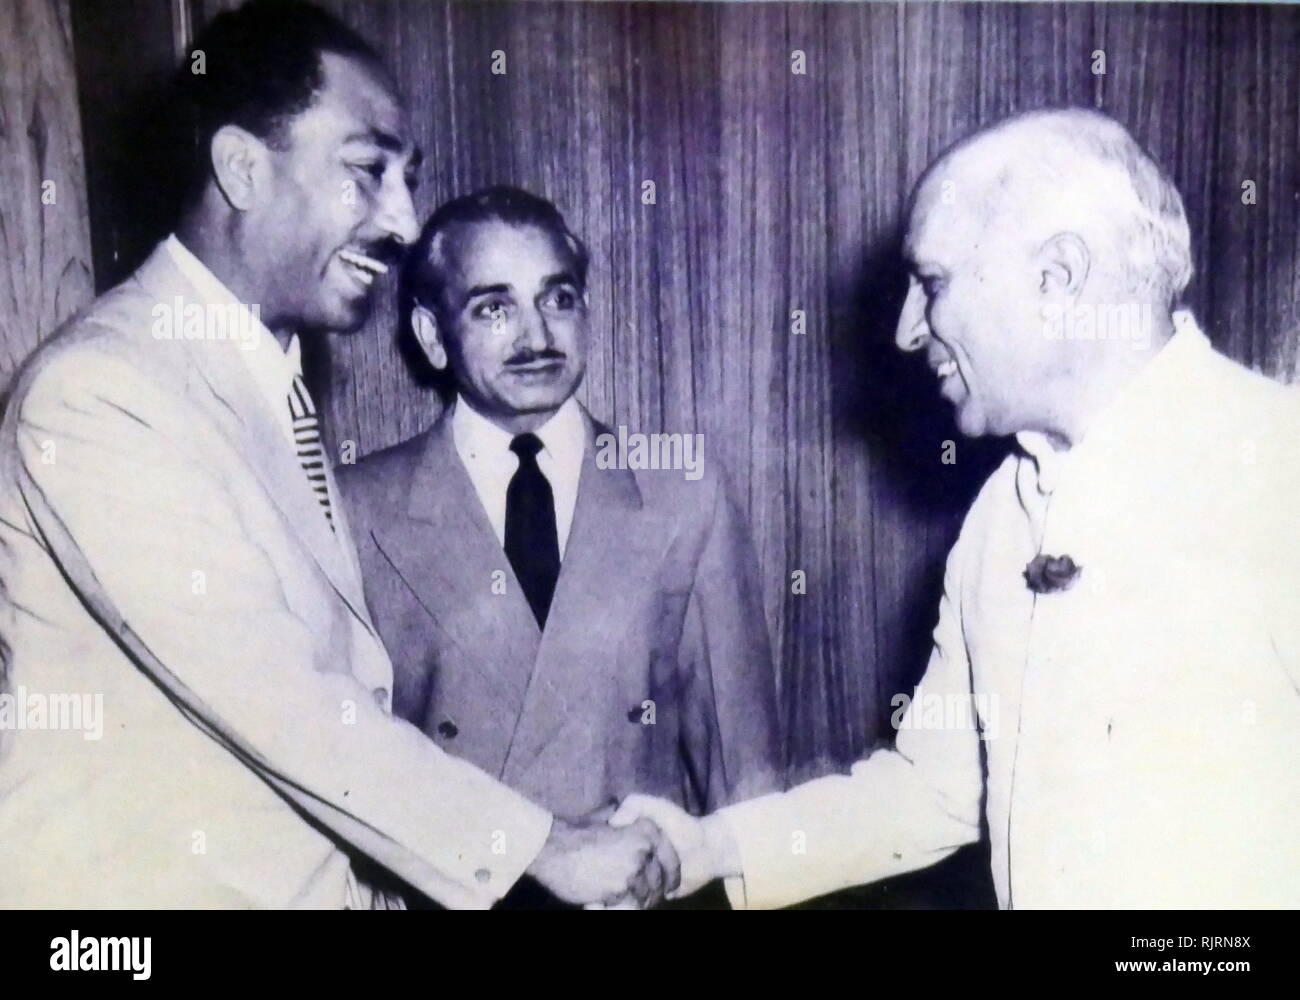 Anwar el-Sadat, of Egypt, with Prime Minister Nehru of India. 1955 Stock Photo